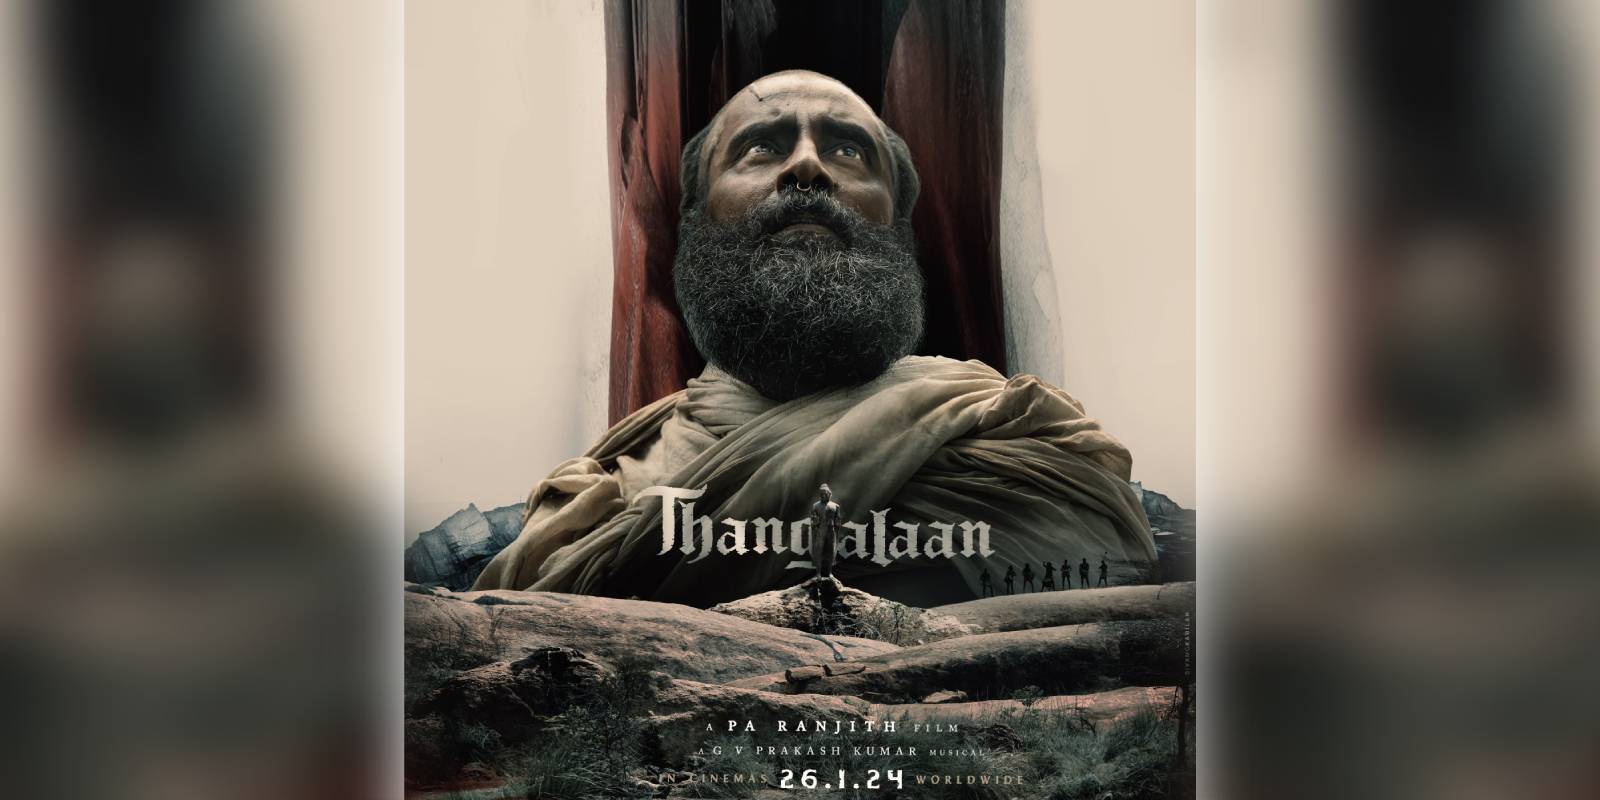 A poster of the film Thangalaan